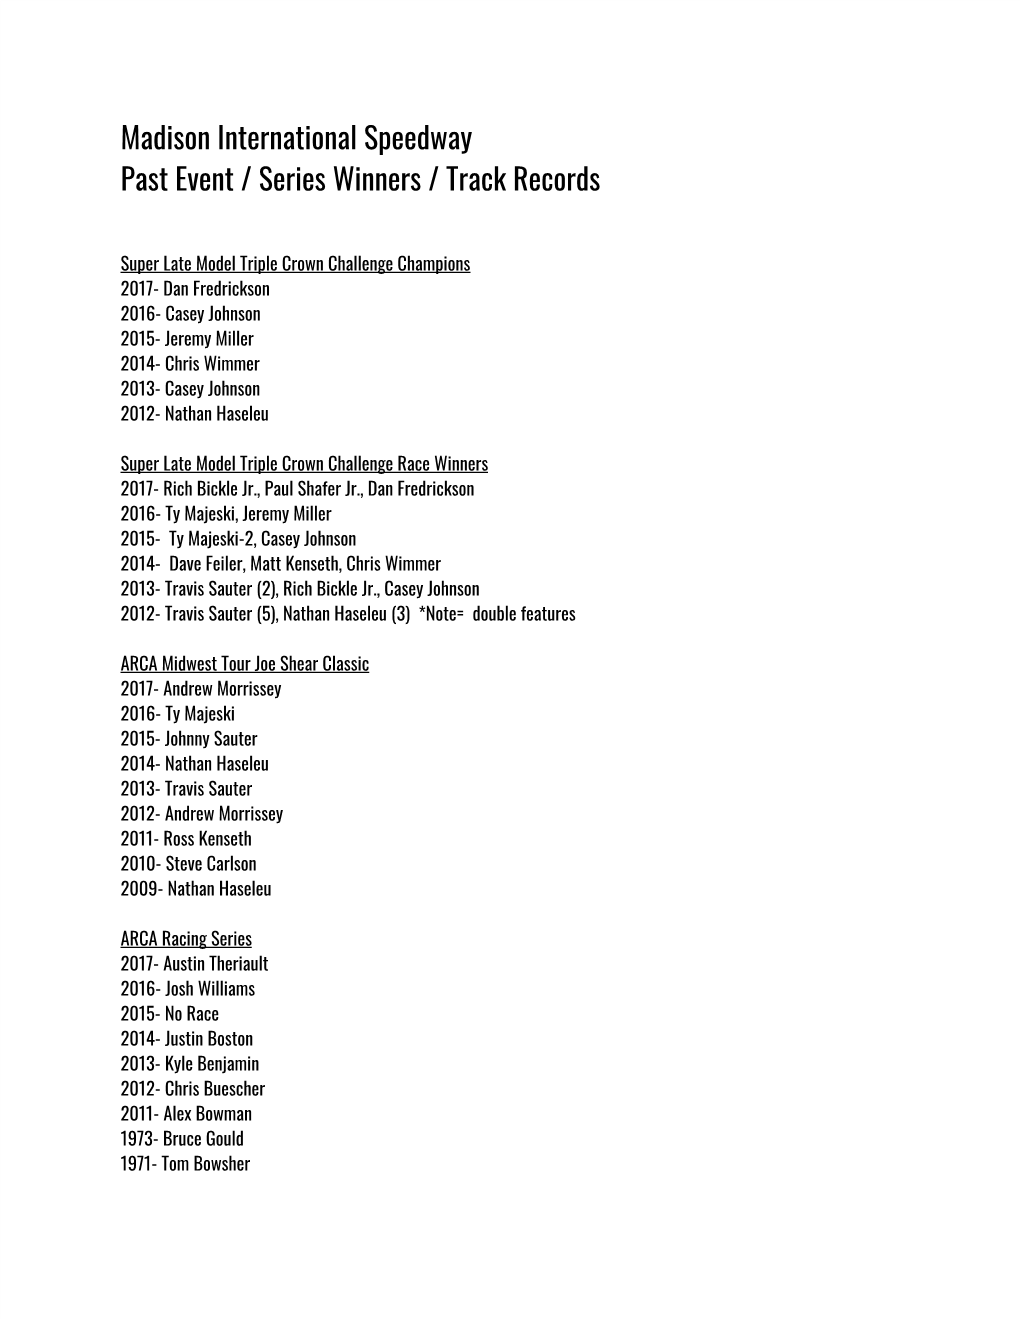 Madison International Speedway Past Event / Series Winners / Track Records